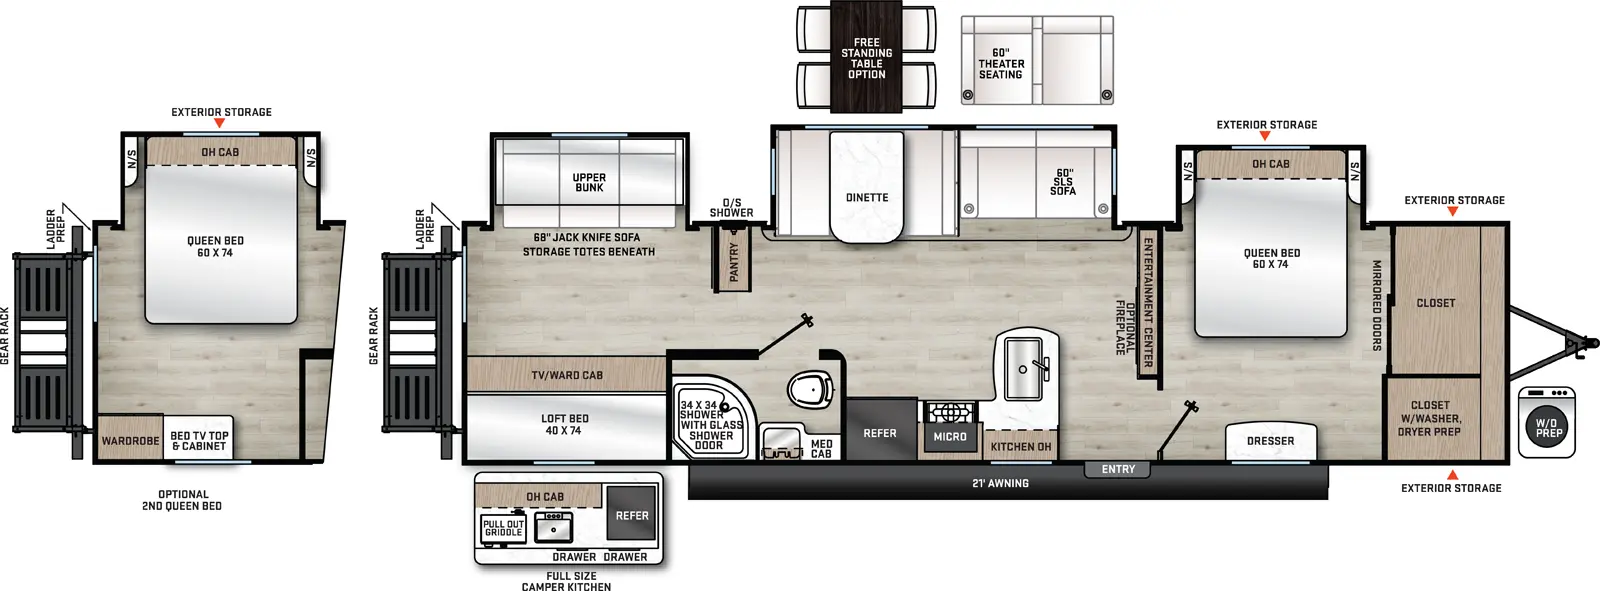 The 343BHTS has three slide outs and one entry. Exterior features a full size camper kitchen with pull out griddle, sink, drawers, refrigerator and overhead cabinet, 21 foot awning, front exterior storage, outside shower, and rear cargo rack. Interior layout front to back: closet with washer/dryer prep, off-door side queen bed slide out with overhead cabinet and night stands on each side, and door side dresser; entertainment center along inner wall; off-door side slide out with sofa and dinette, and wardrobe; door side entry, peninsula kitchen counter with sink wraps to door side with overhead cabinet, cook top, microwave, and refrigerator; door side full bathroom with medicine cabinet; and rear bunk room with door side lofted bed and TV/wardrobe below, and off-door side slide out containing COA cube futon and upper flip up bunk. Optional free standing dinette available in place of standard dinette. Optional fireplace available on living room entertainment center.